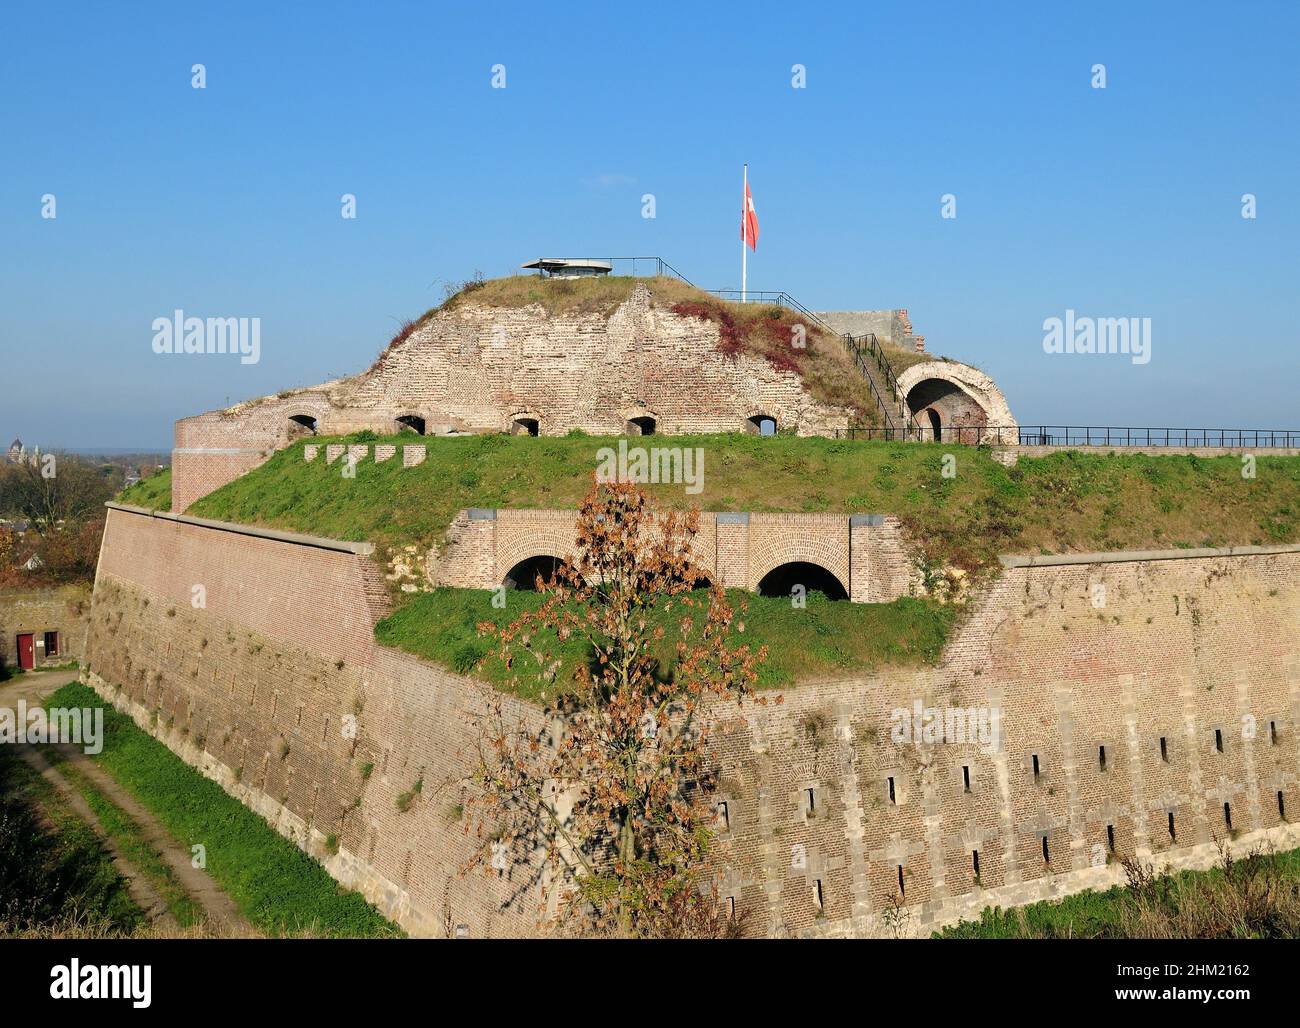 Fort Sint Pieter Near Maastricht Netherlands On A Beautiful Sunny Autumn Day With A Clear Blue Sky Stock Photo